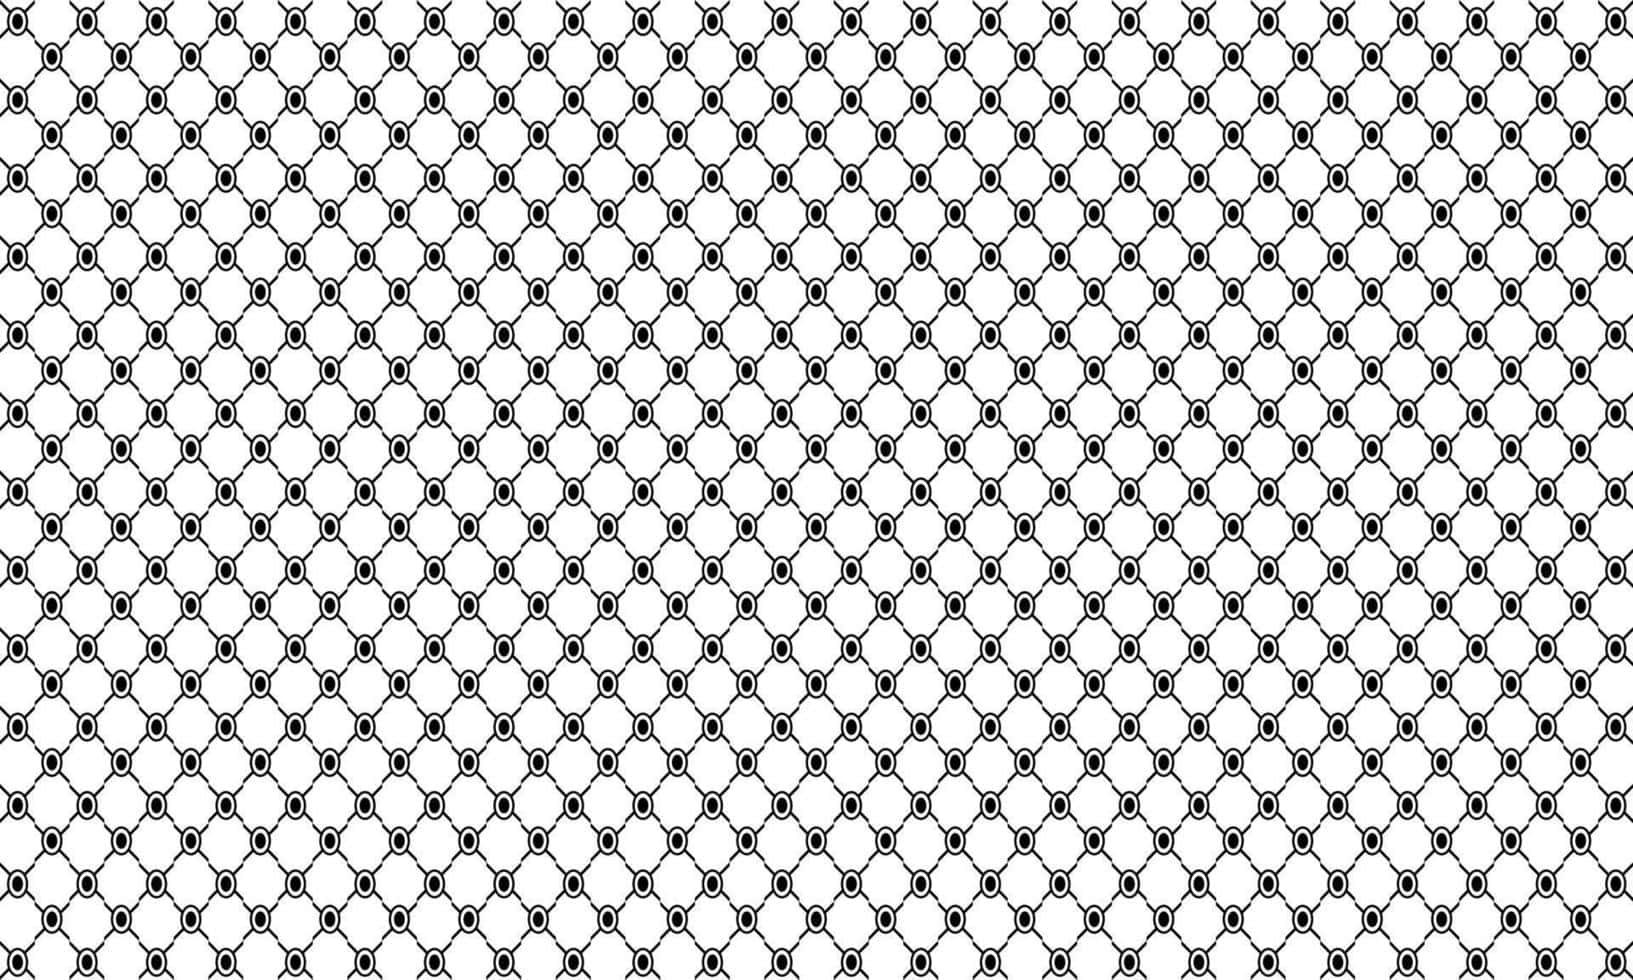 Connected Oval Dots Wallpaper